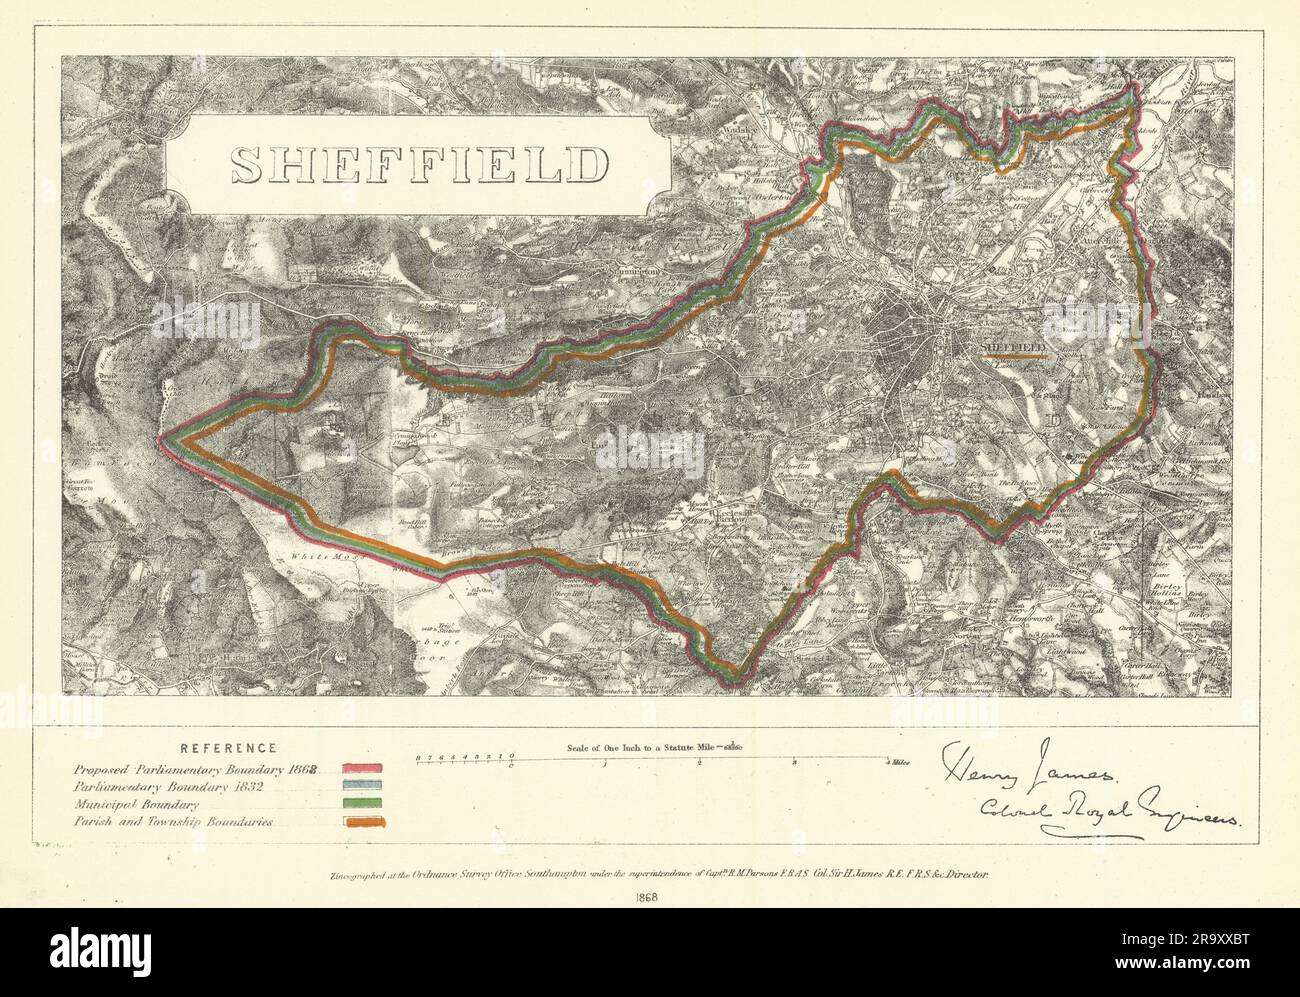 Sheffield, Yorkshire. JAMES. Parliamentary Boundary Commission 1868 old map Stock Photo